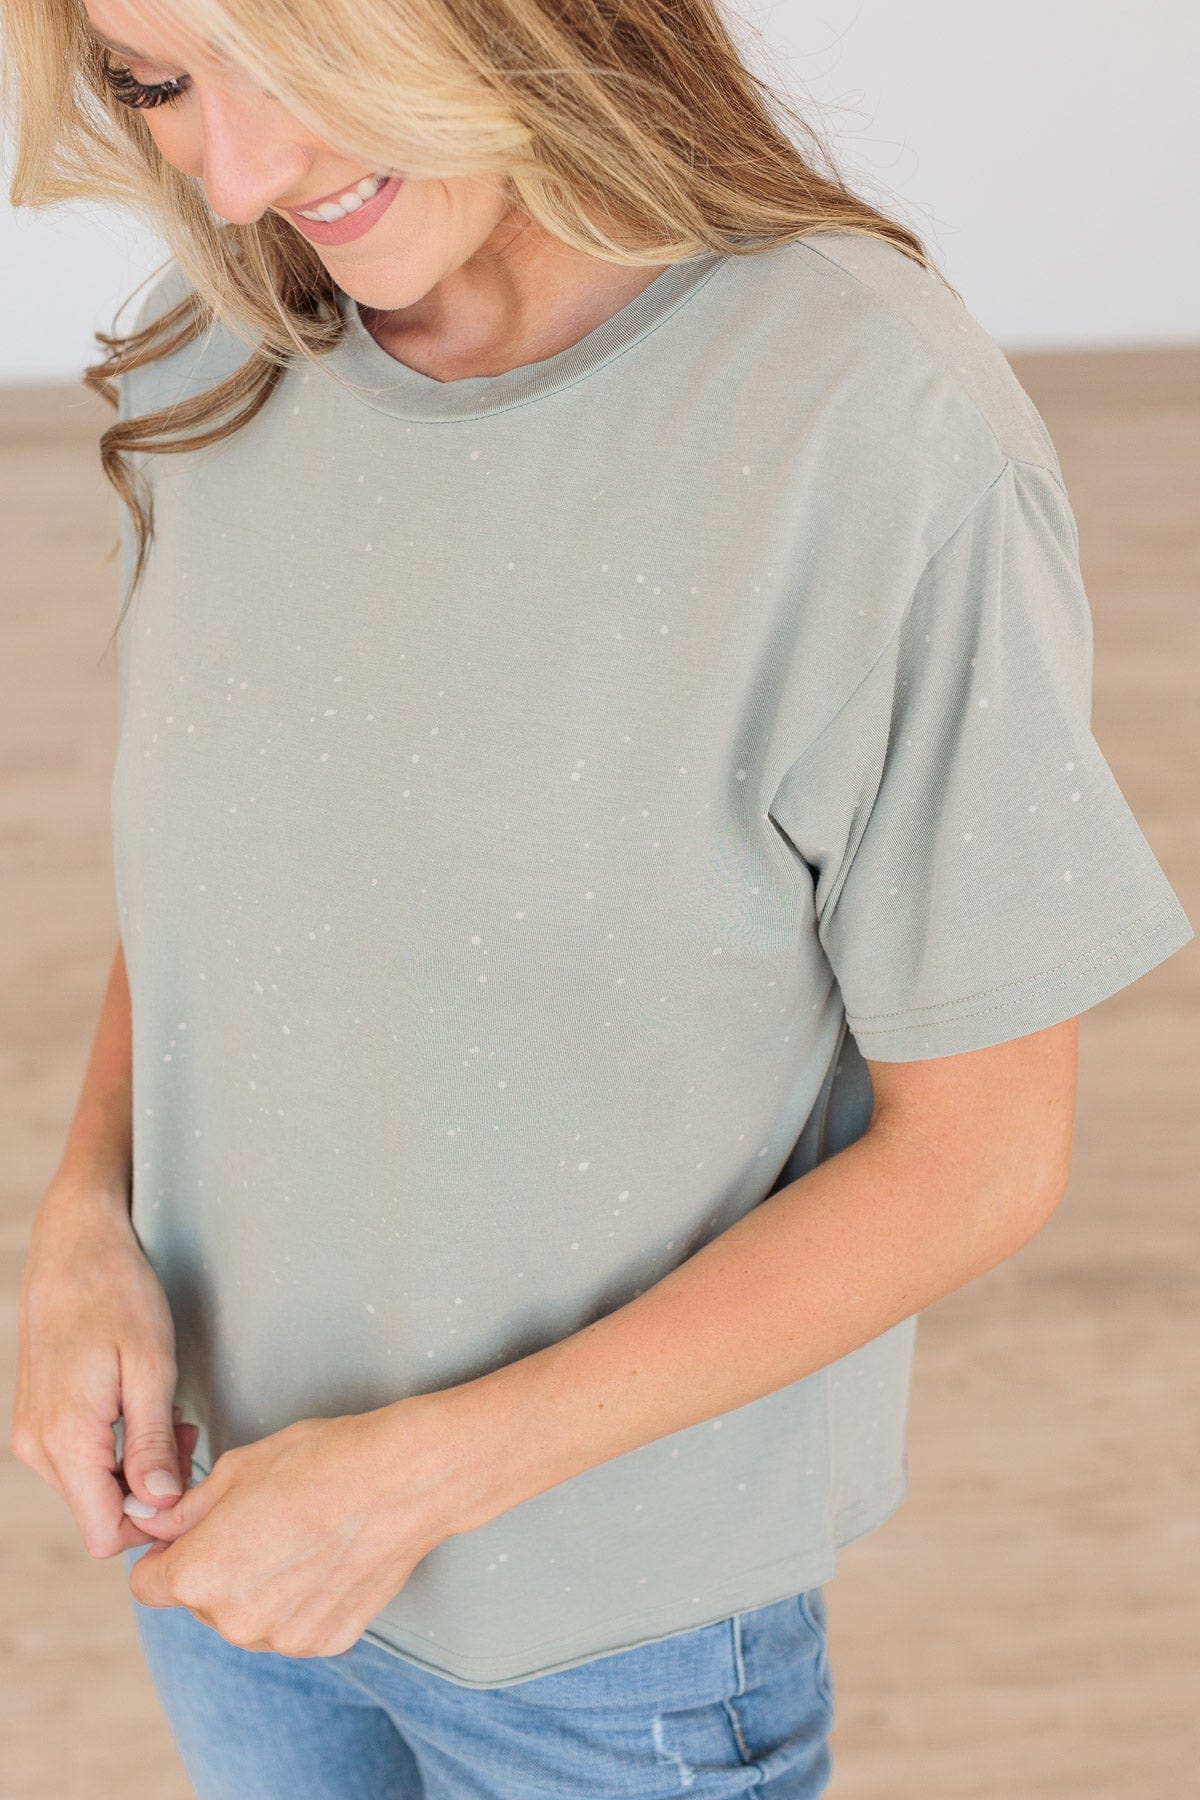 Thread & Supply One For All Speckled Top- Dusty Sage